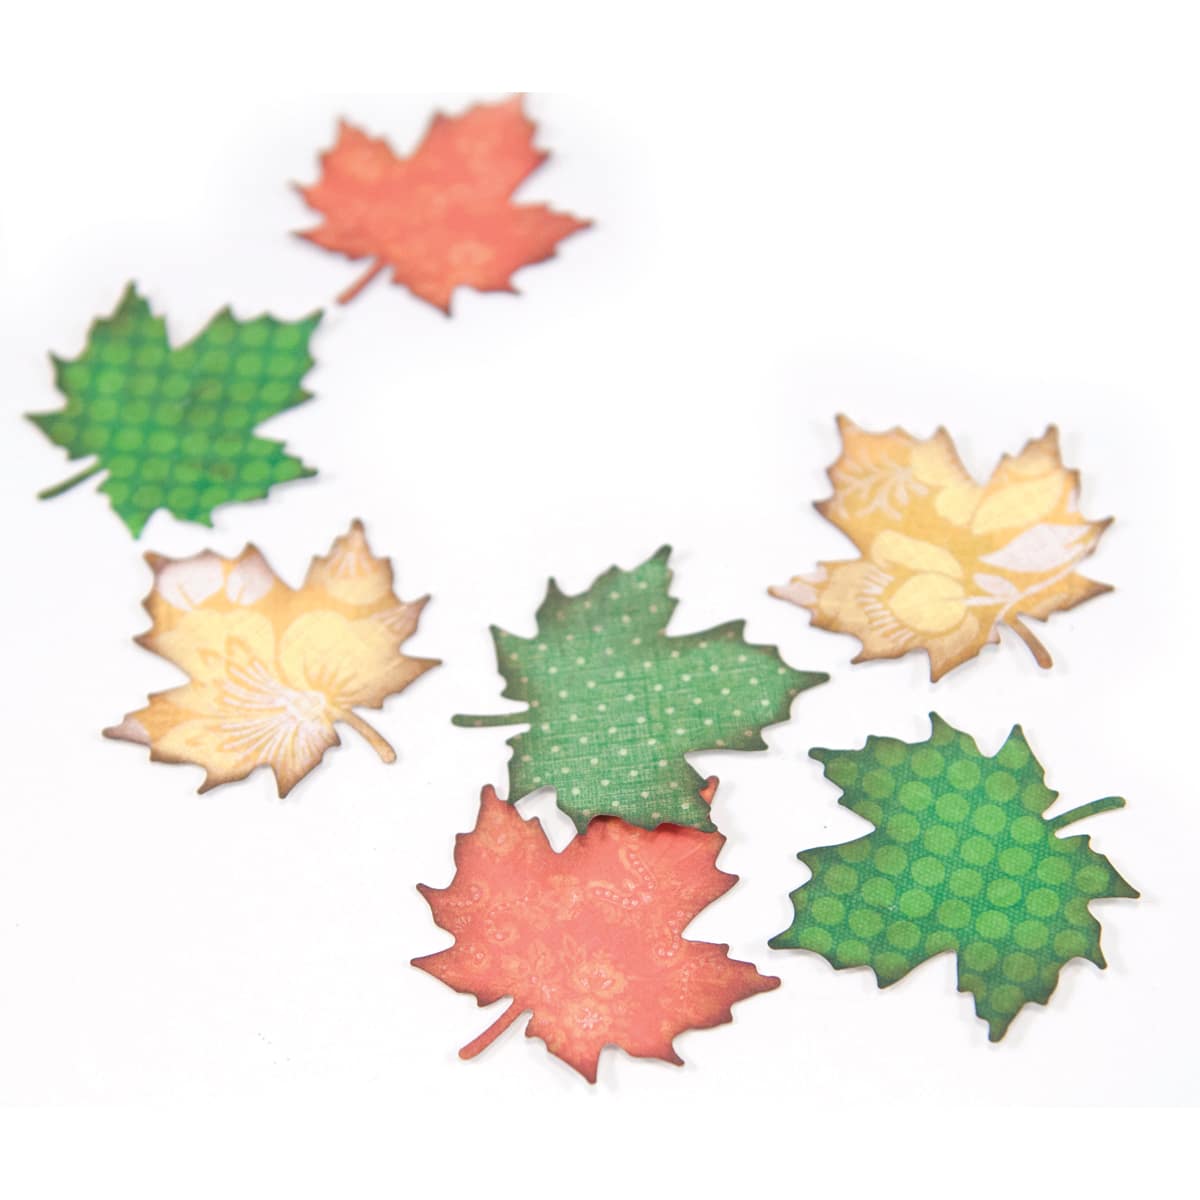  AYNEFY Craft Hole Punch Shapes Set Paper Punch Beautiful Paper  Punch Cutter Tree Leaf Making DIY Craft Accessories with 8pcs Paper for  Children to Play (Maple Leaf)